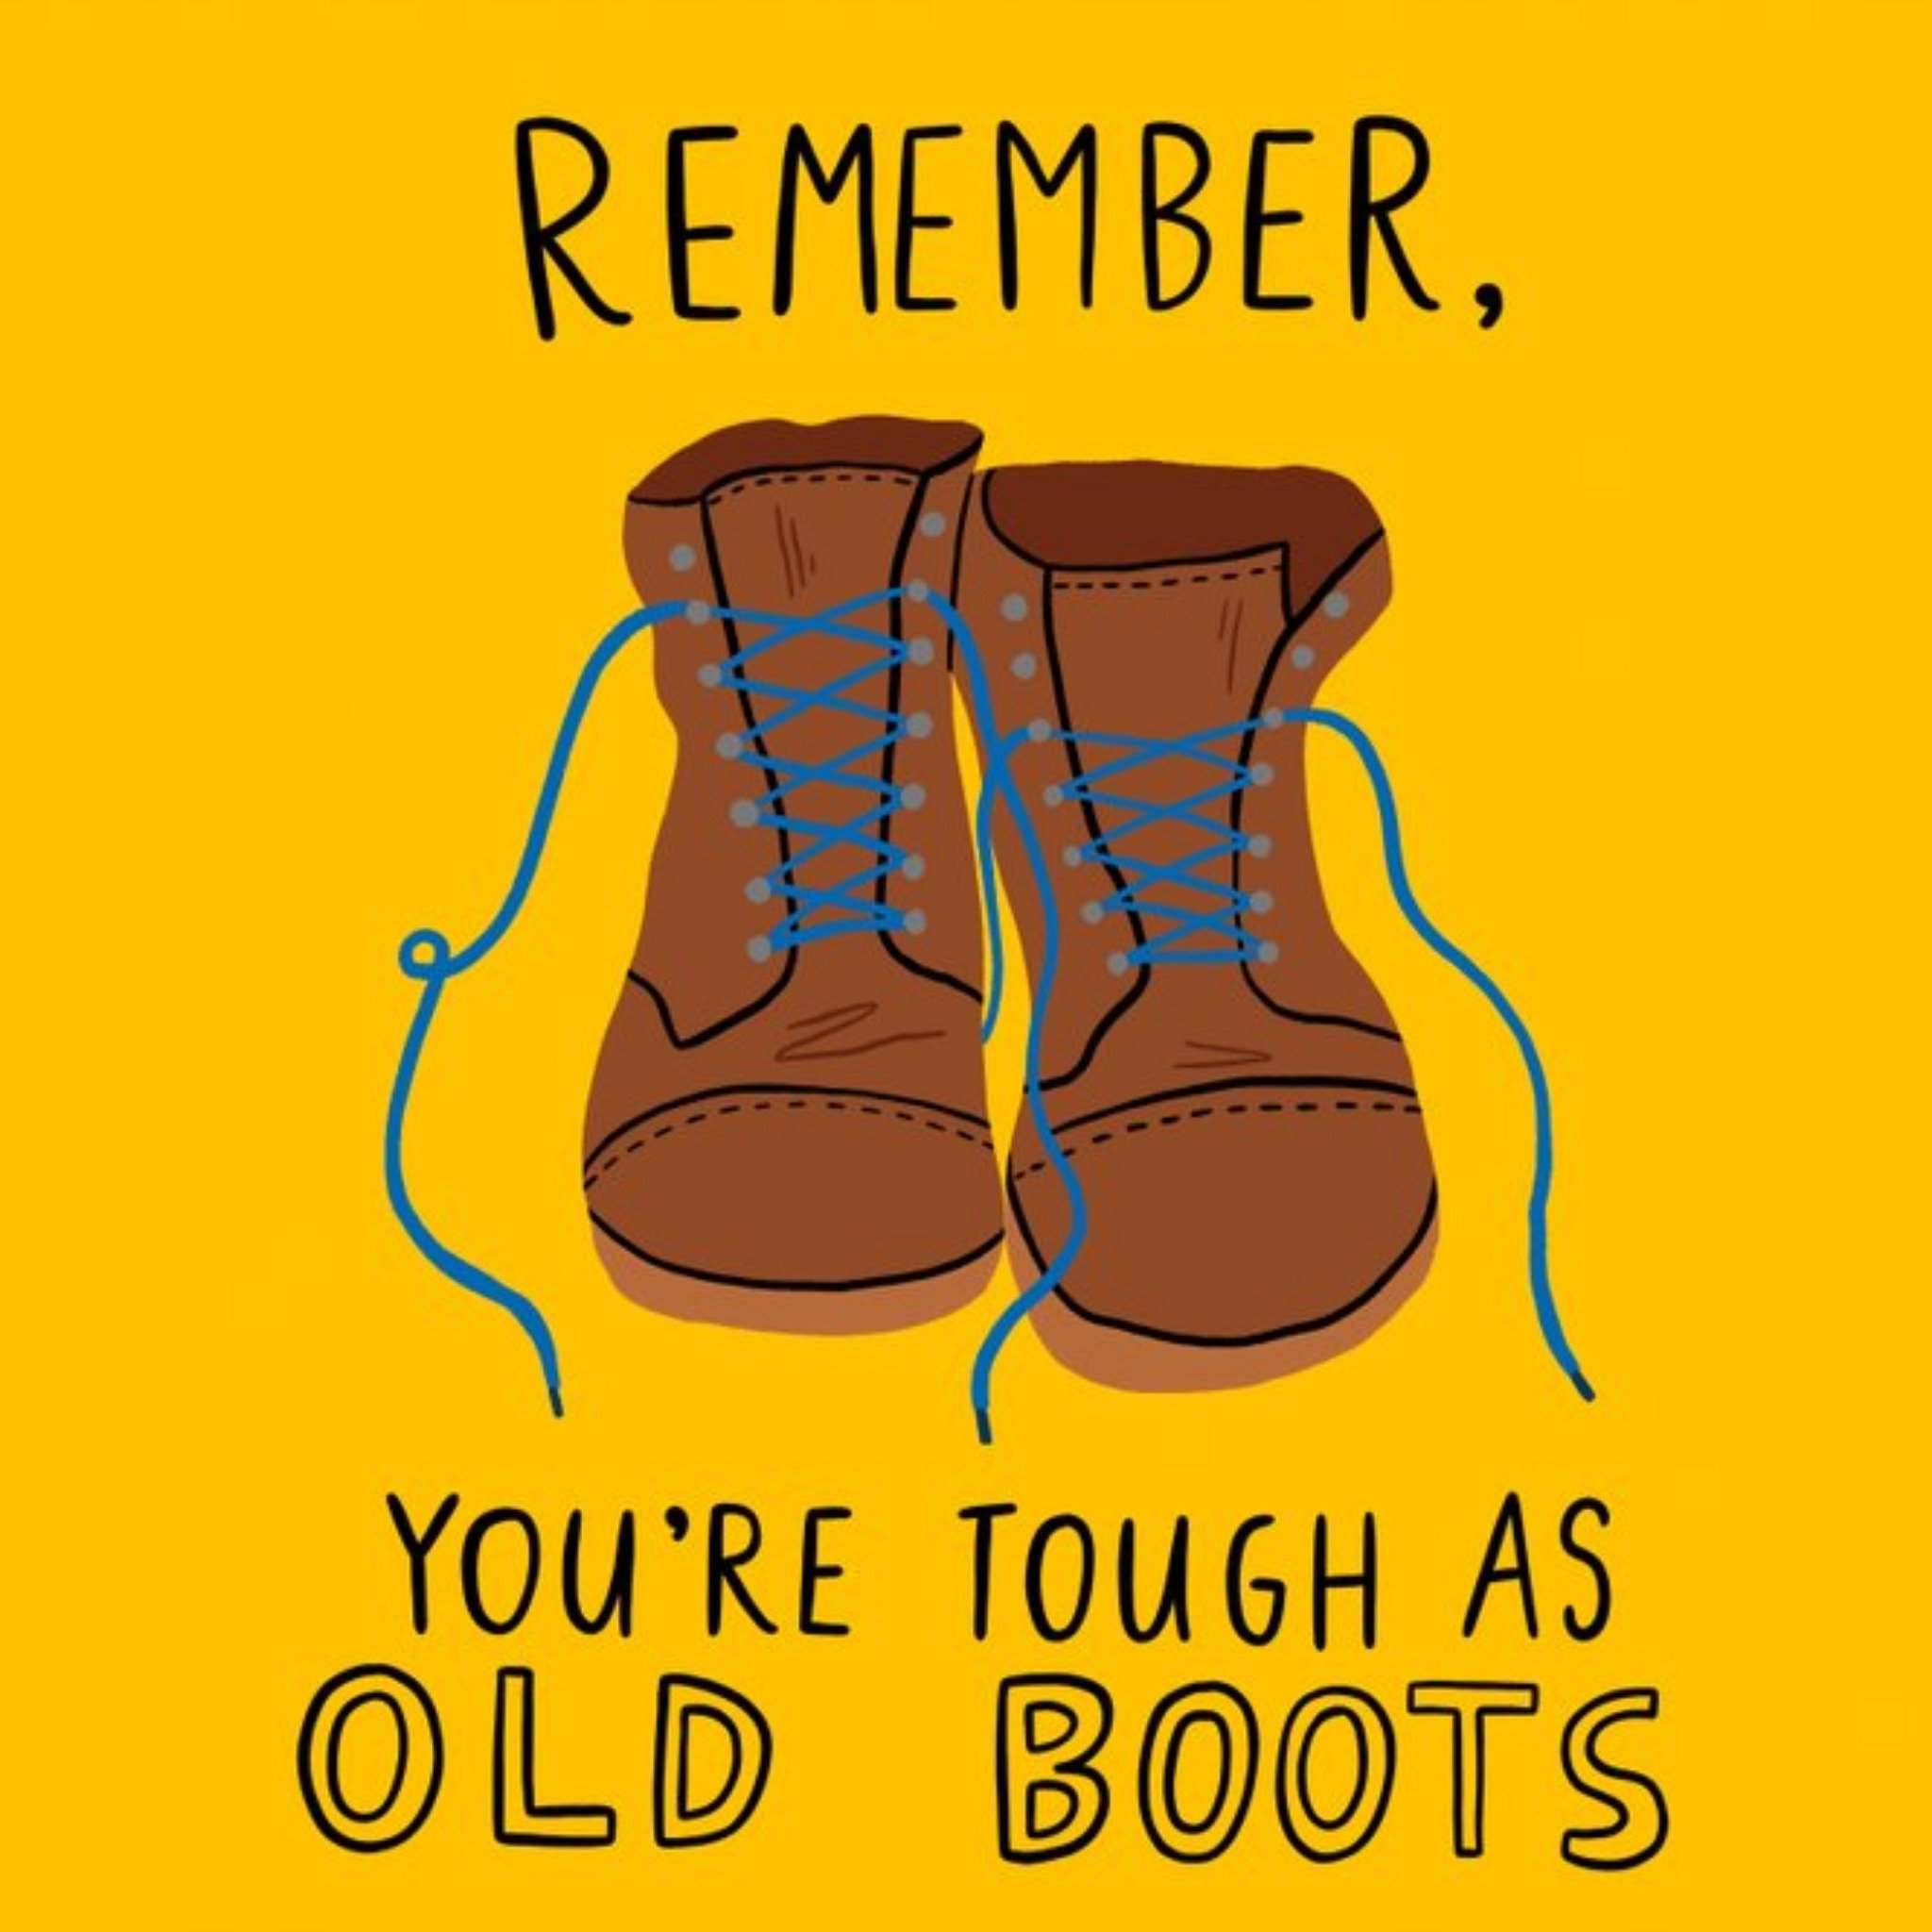 Moonpig Kapow Illustration Of Some Old Boots Remember, You're Tough As Old Boots Card, Square